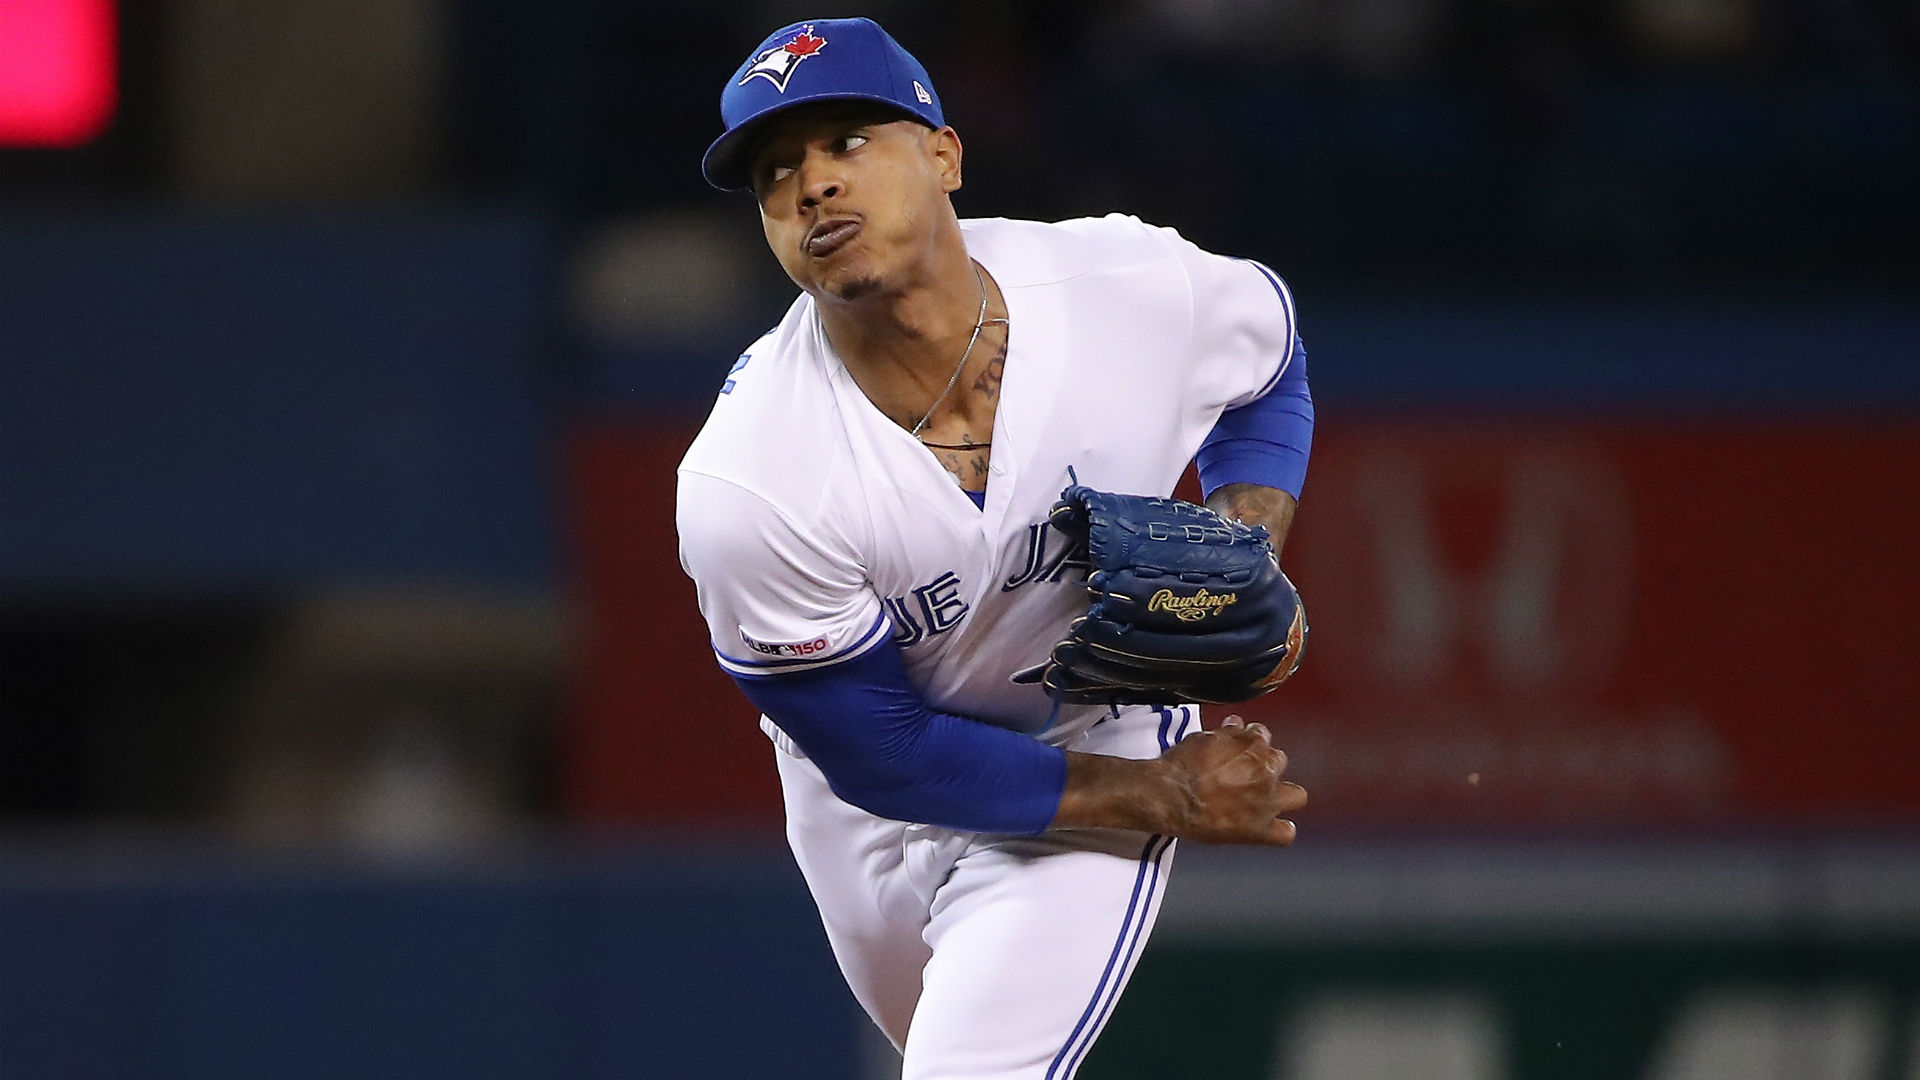 "It doesn’t seem like I’m going to be signed here to a long-term deal," Stroman said. "It’s just something you have to come to terms with."